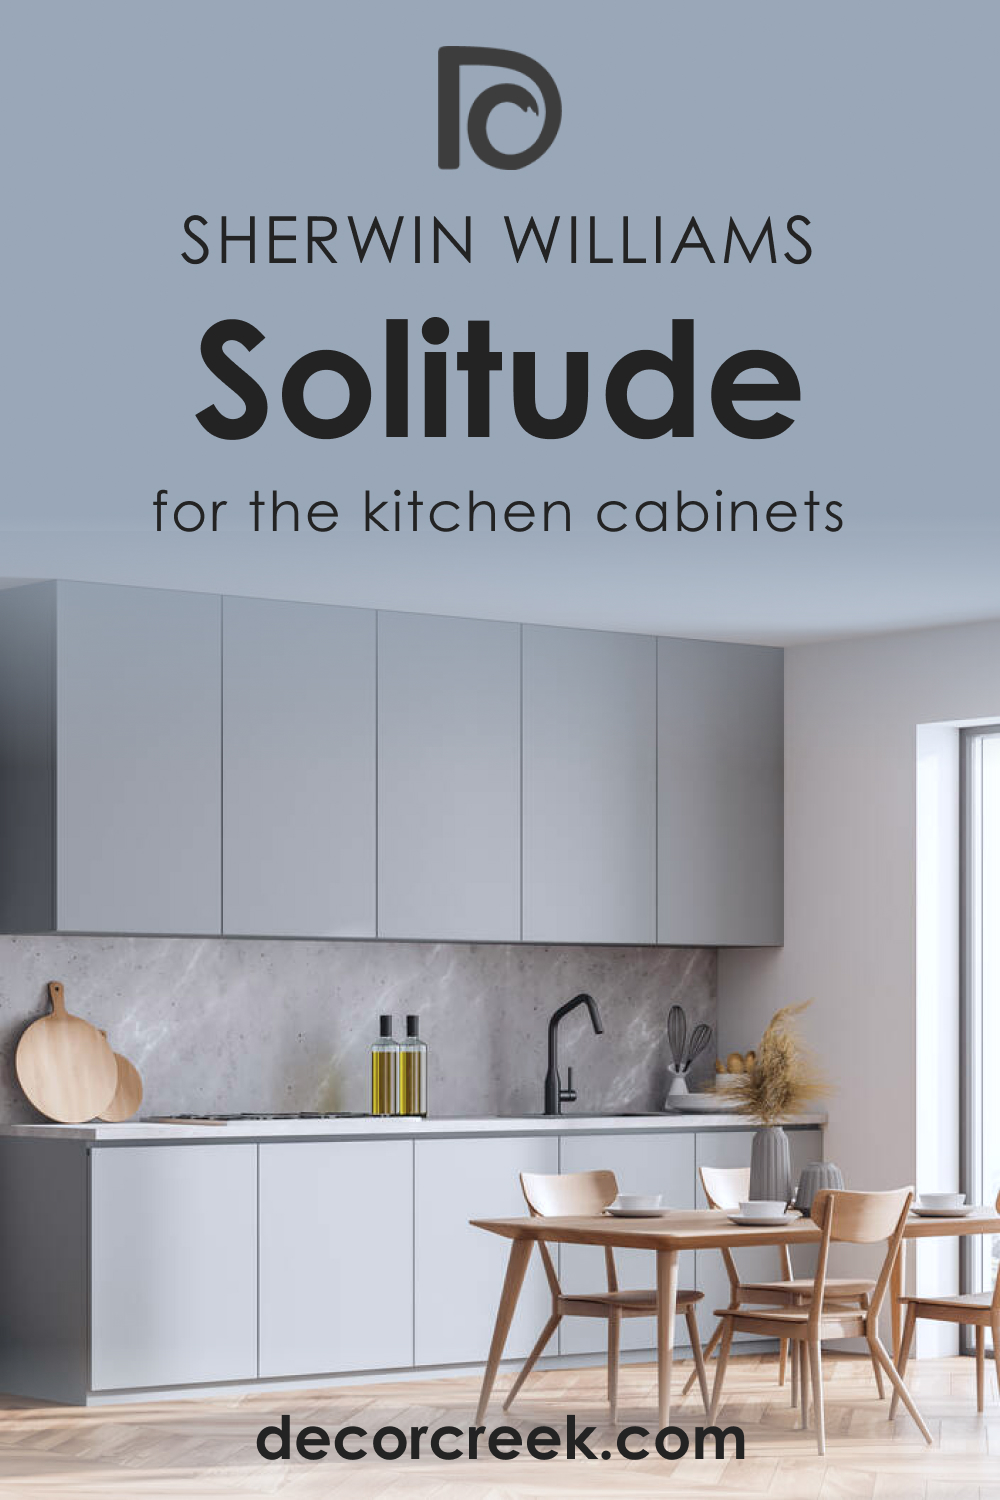 How to Use SW 6535 Solitude for the Kitchen Cabinets?